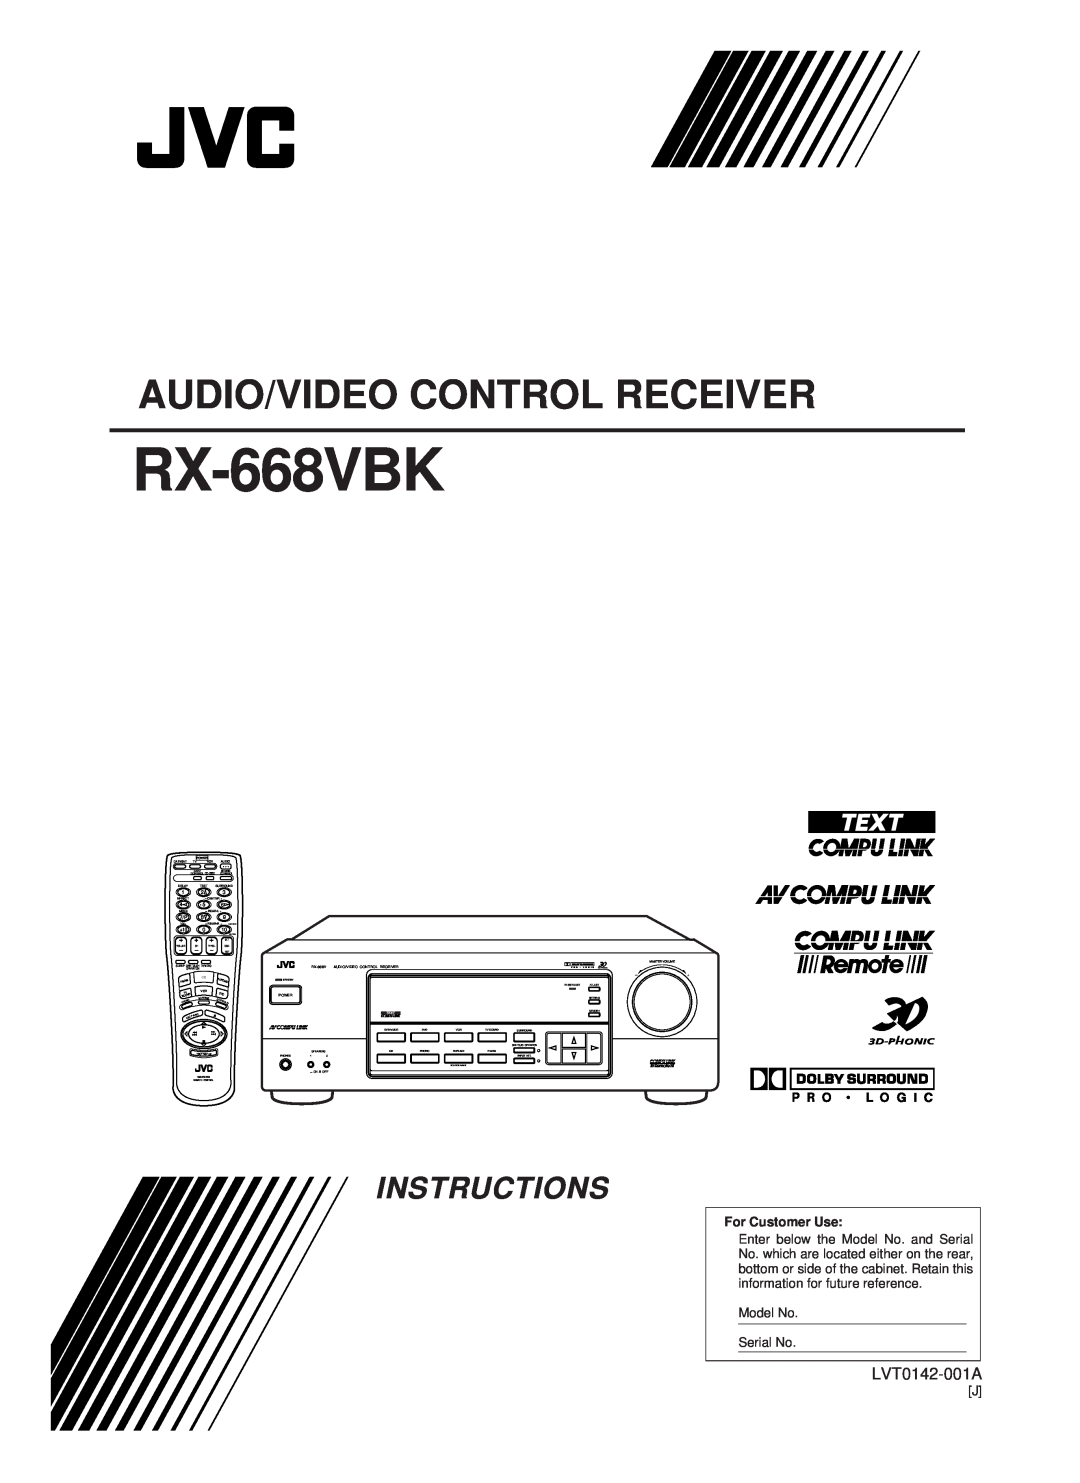 JVC RX-668VBK manual Audio/Video Control Receiver, Instructions, LVT0142-001A, For Customer Use 